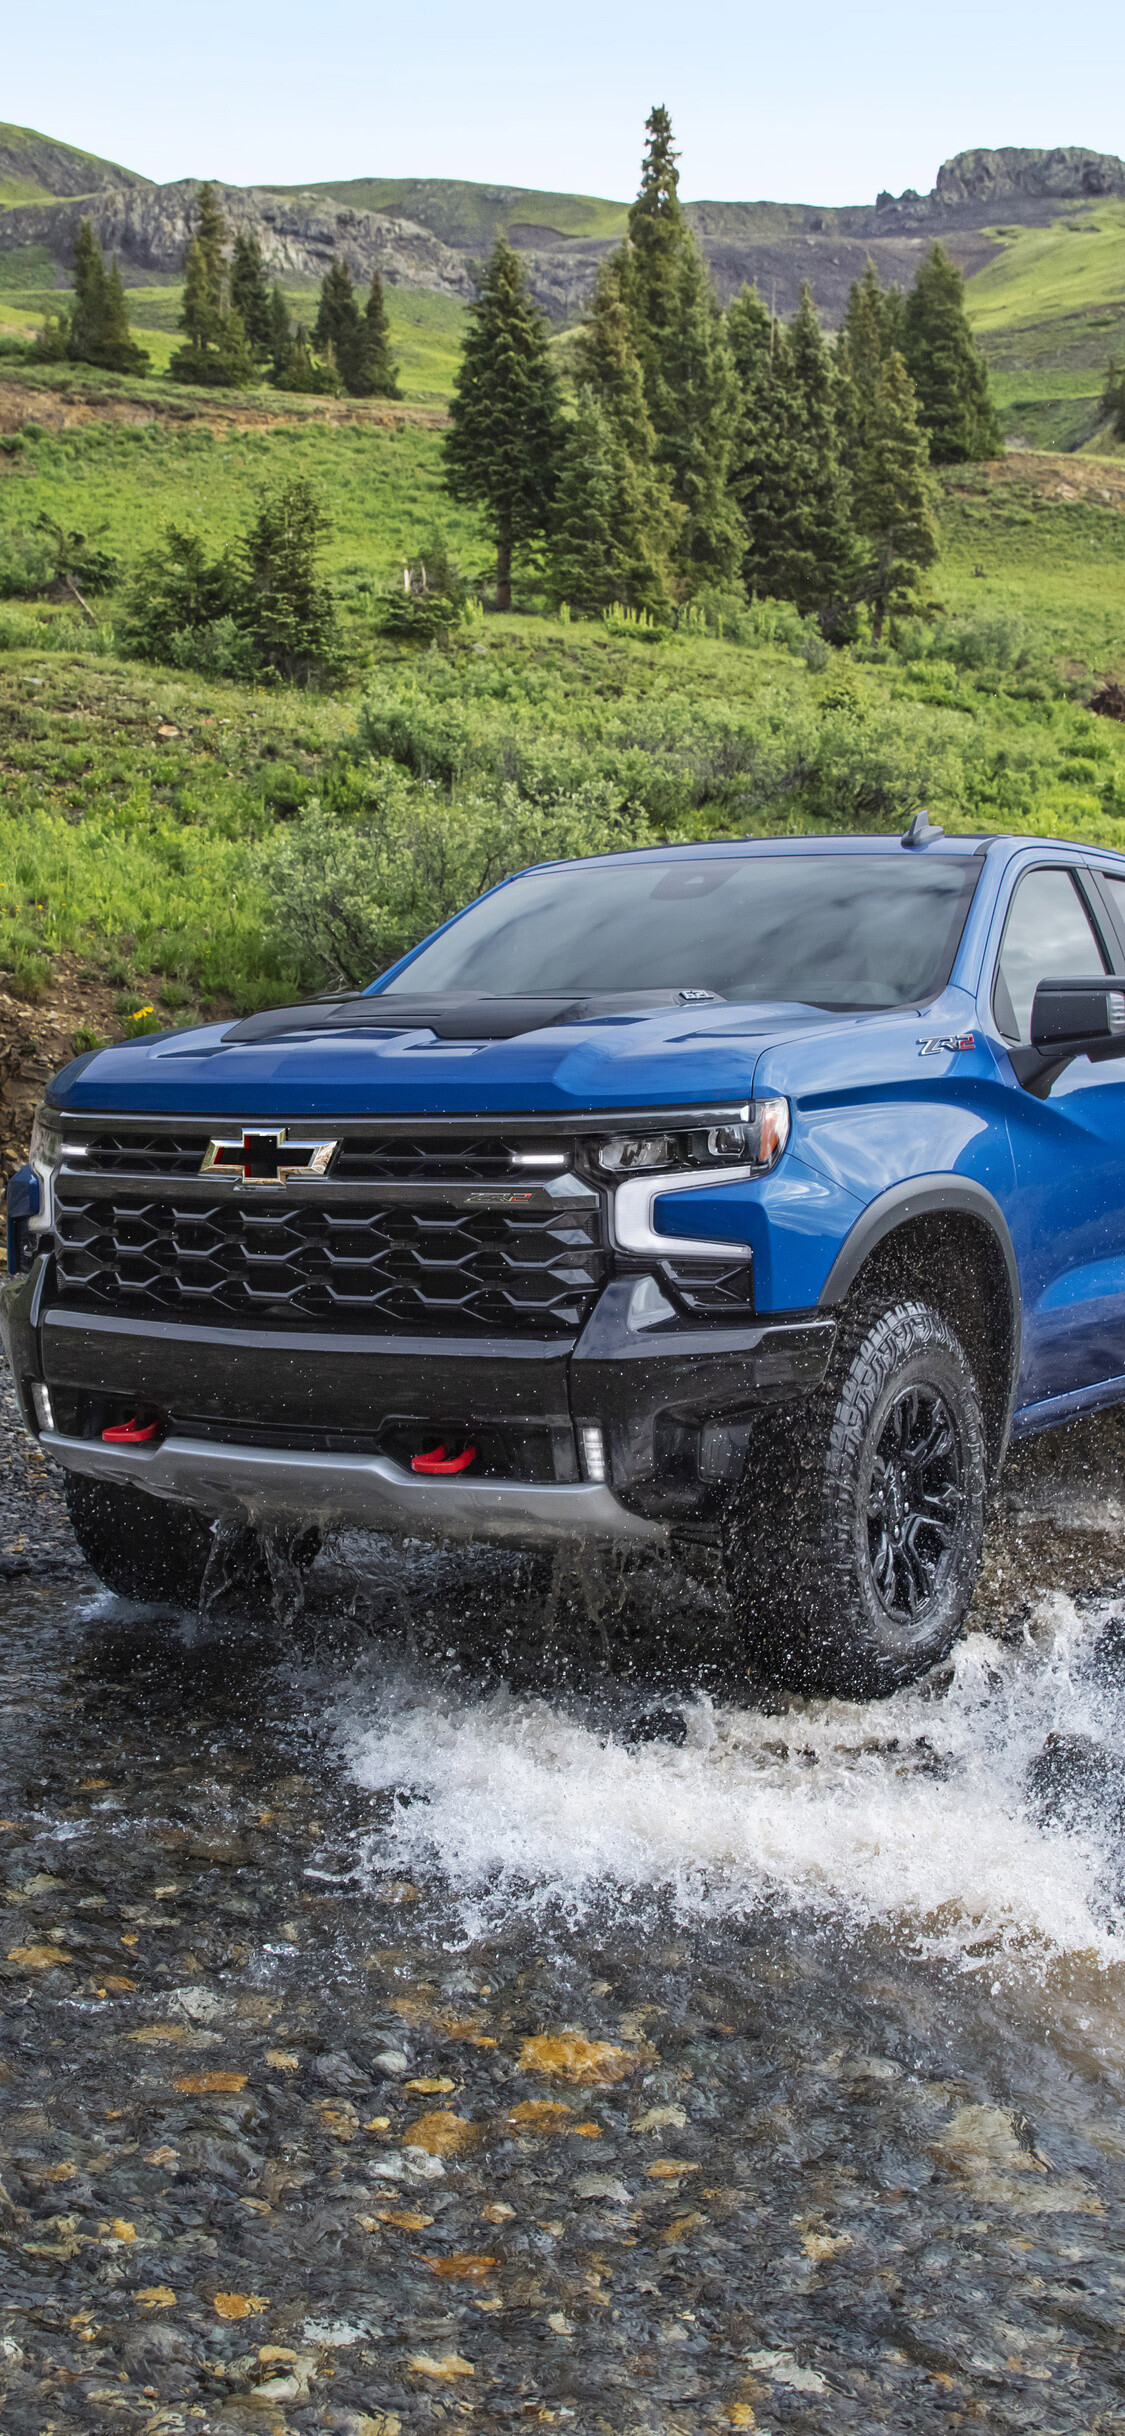 Chevrolet Silverado: ZR2, Chevy’s new flagship off-road truck, The latest addition to a successful lineup of off-road, factory-installed lifted trucks. 1130x2440 HD Background.